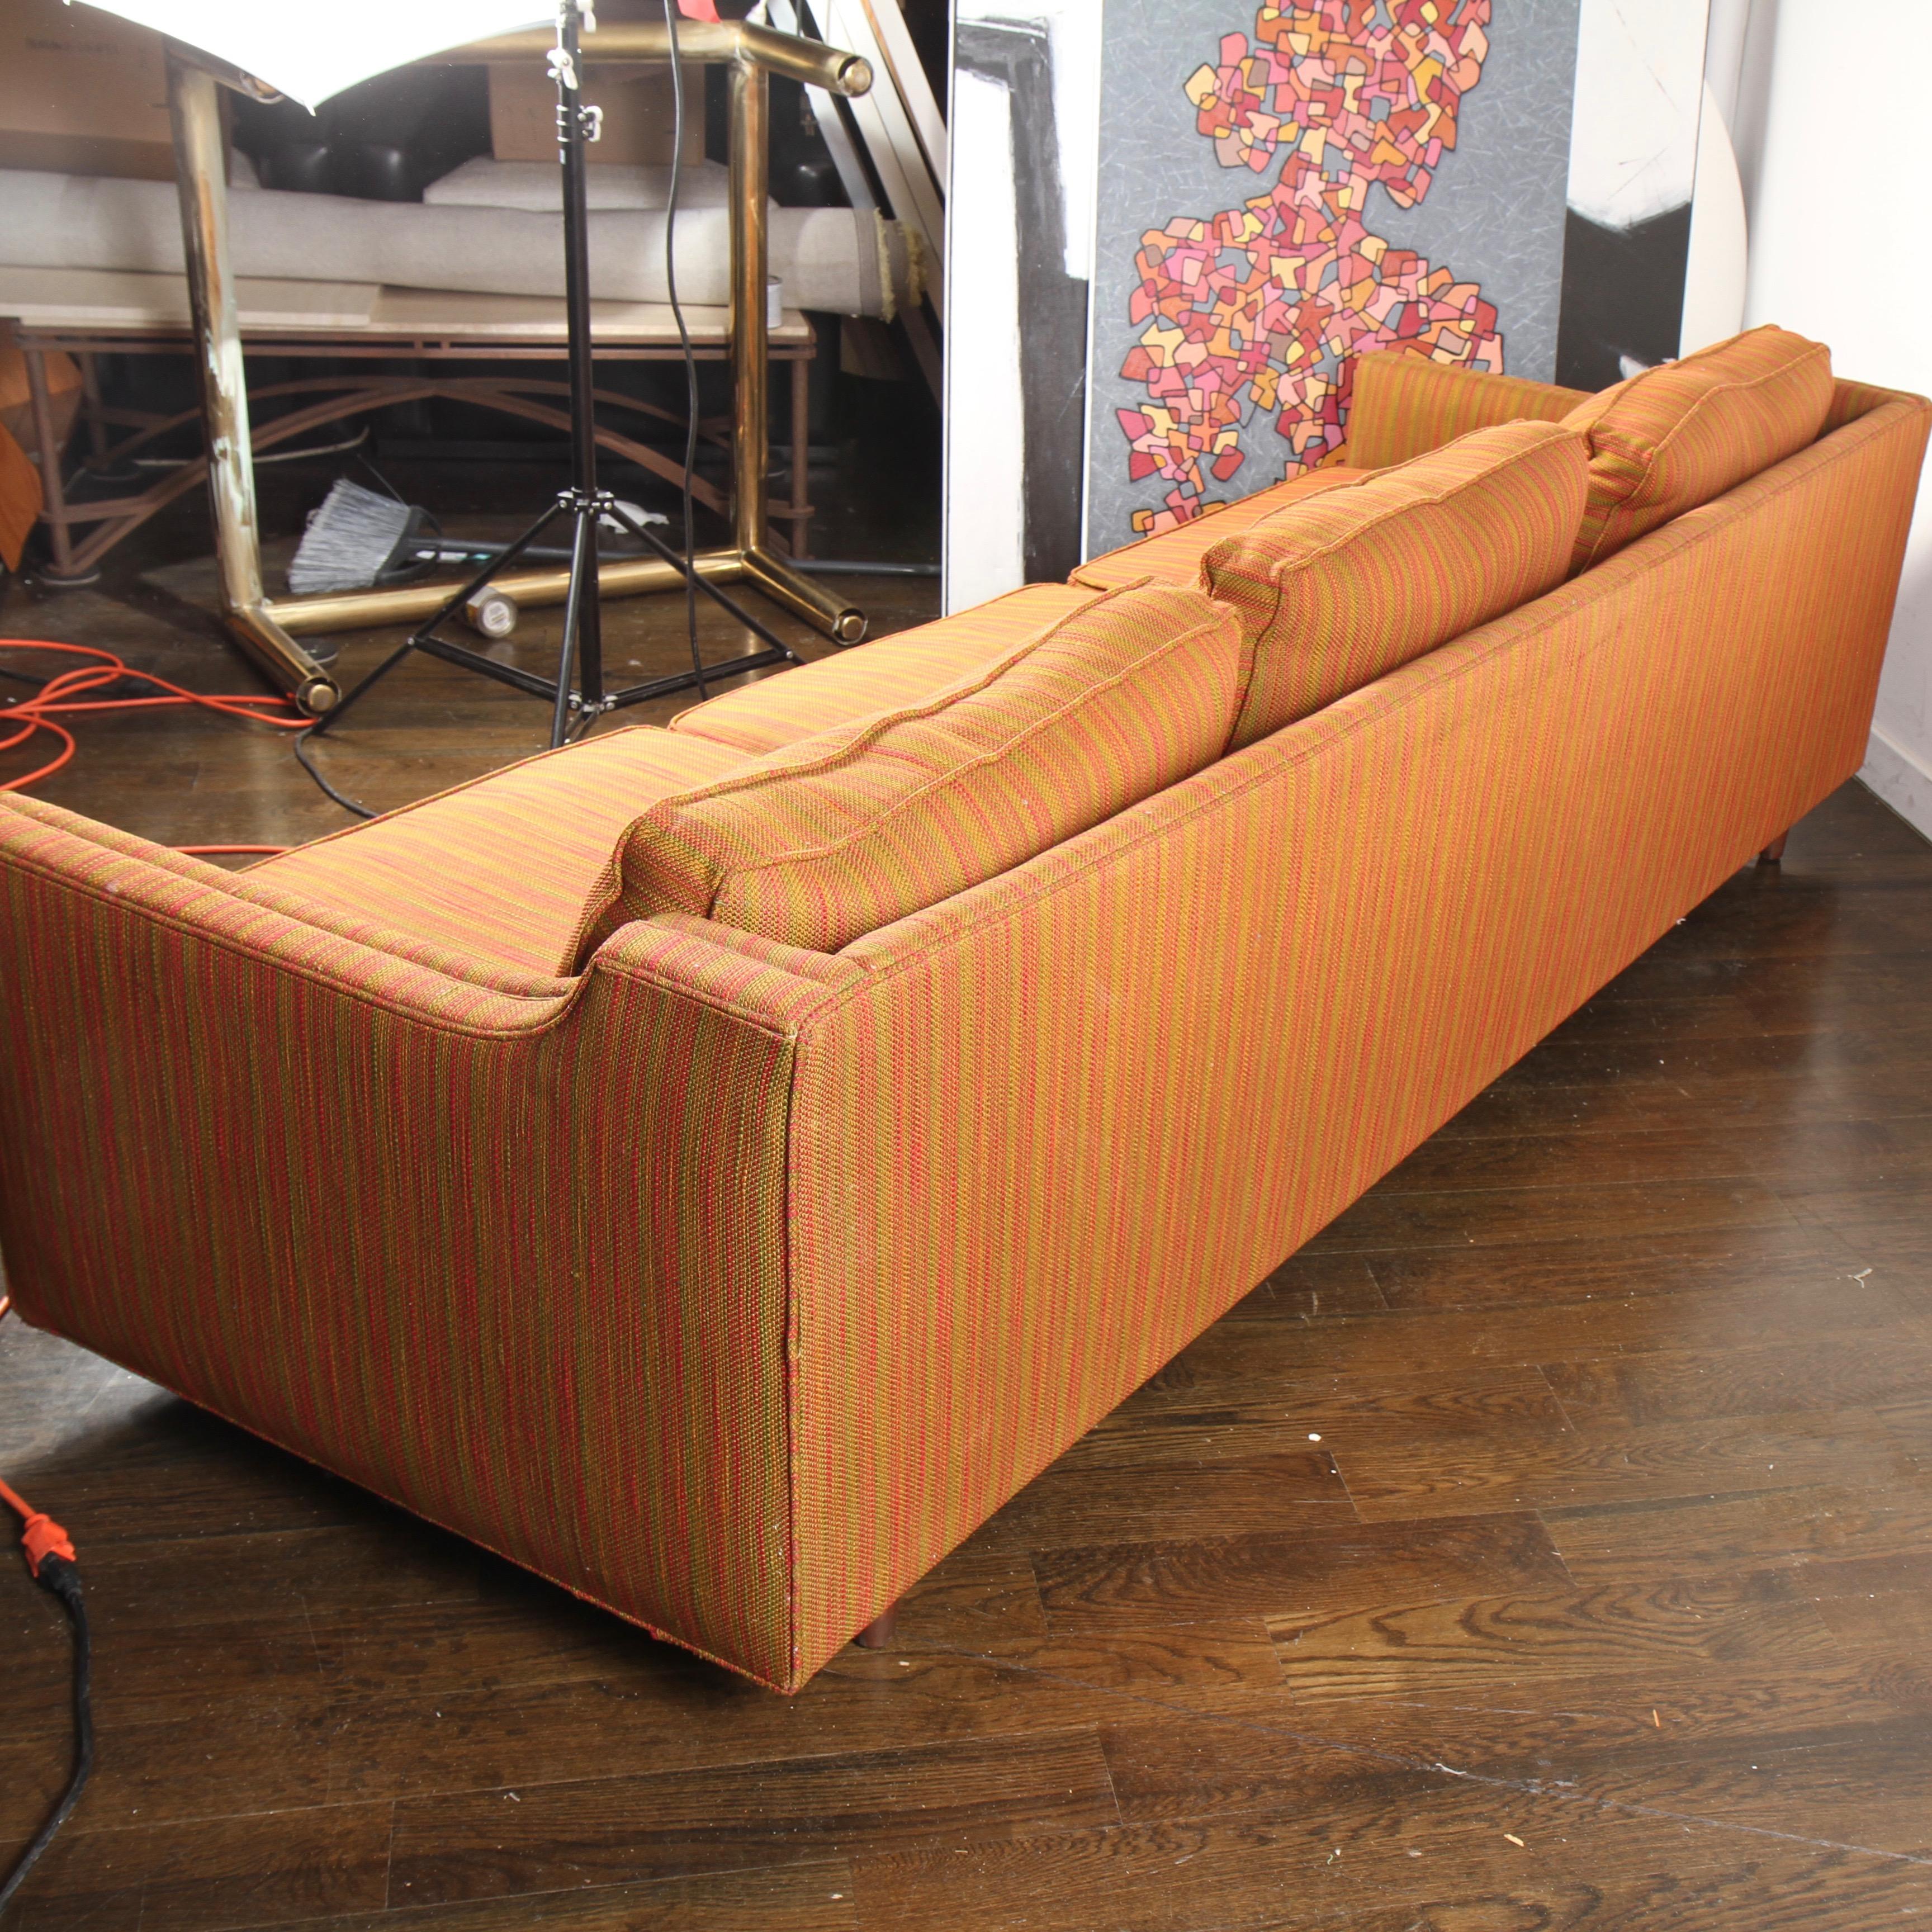 1960s vintage large, well-made sofa by Selig. Clean, original upholstery with new cushions. Can have reupholstered in your fabric for an additional $600. The Selig Manufacturing Co was at the cutting edge of contemporary furniture during the